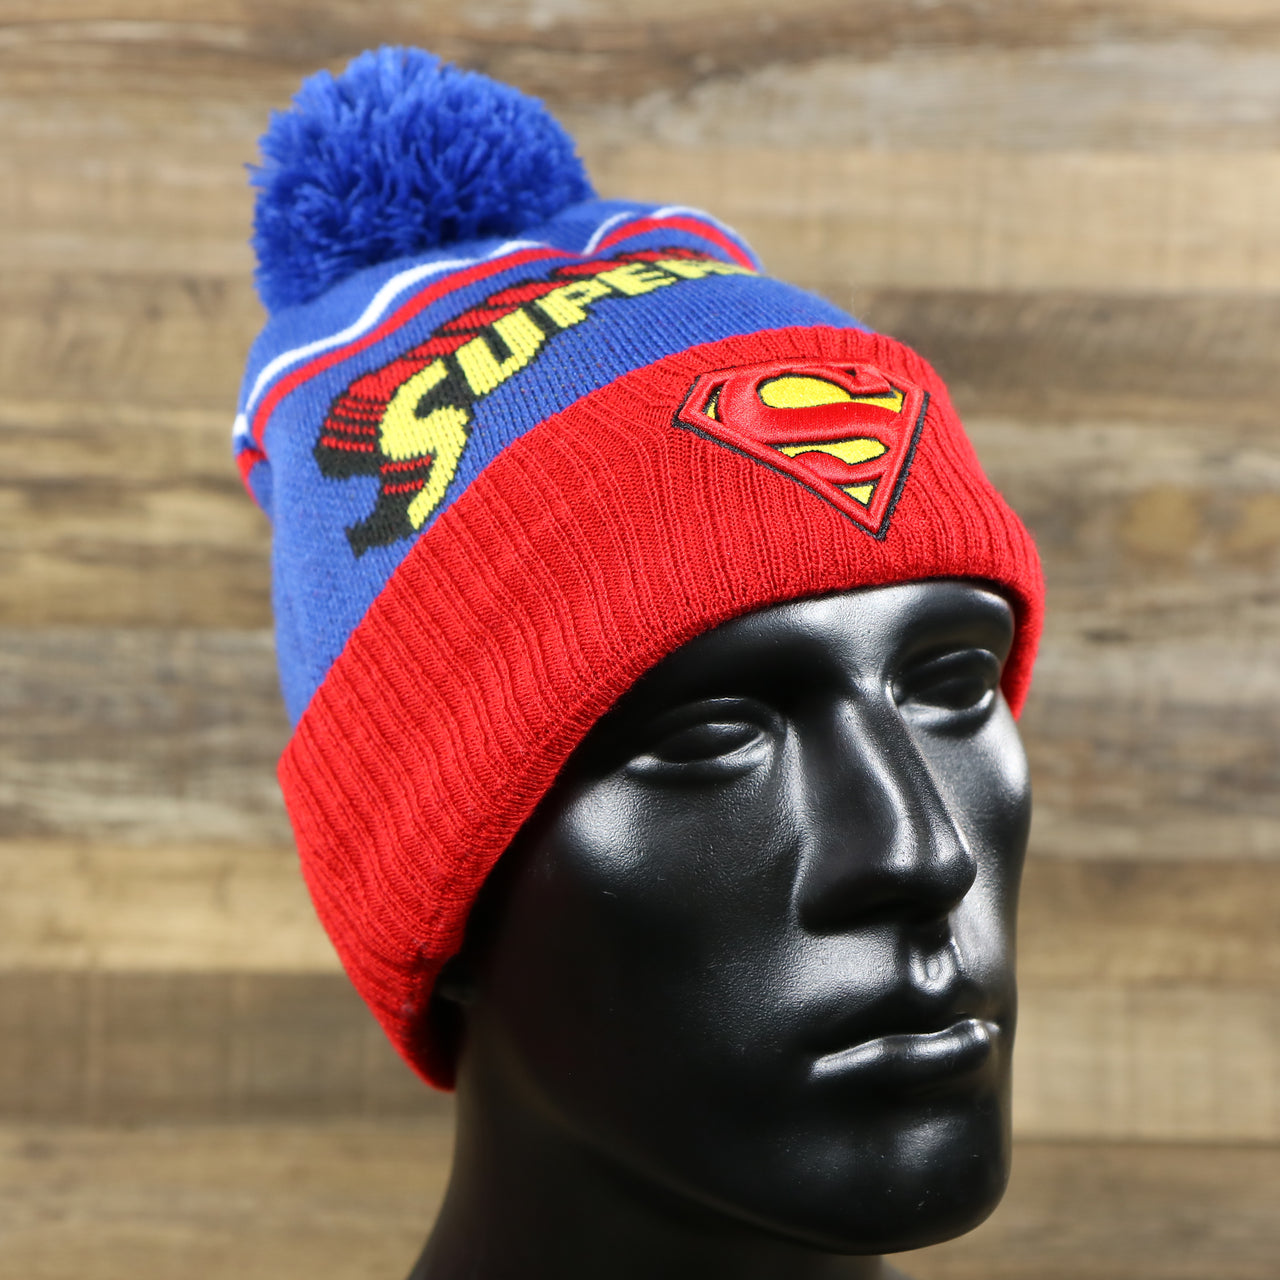 The DC Comics Superman S-Shield Logo Superman Wordmark Striped Beanie With Blue Pom Pom | Blue And Red Winter Beanie on a doll